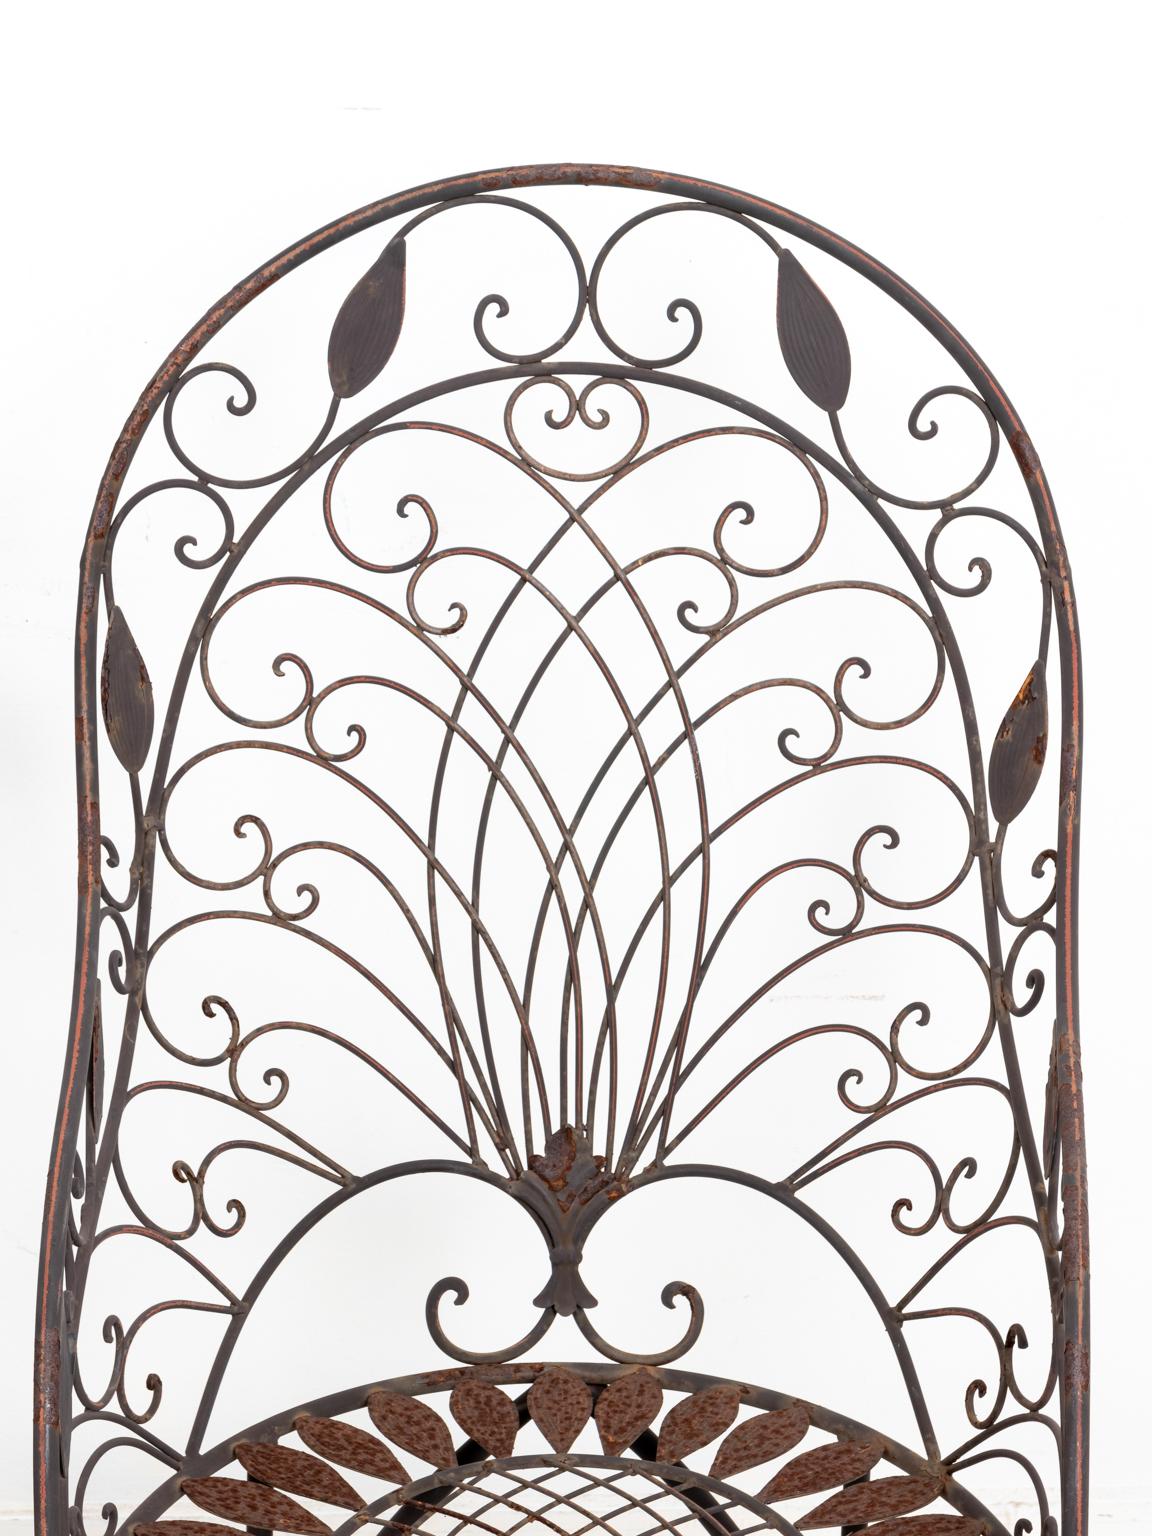 Pair of Wrought Iron Curved Back Garden Chairs with Scrollwork 5